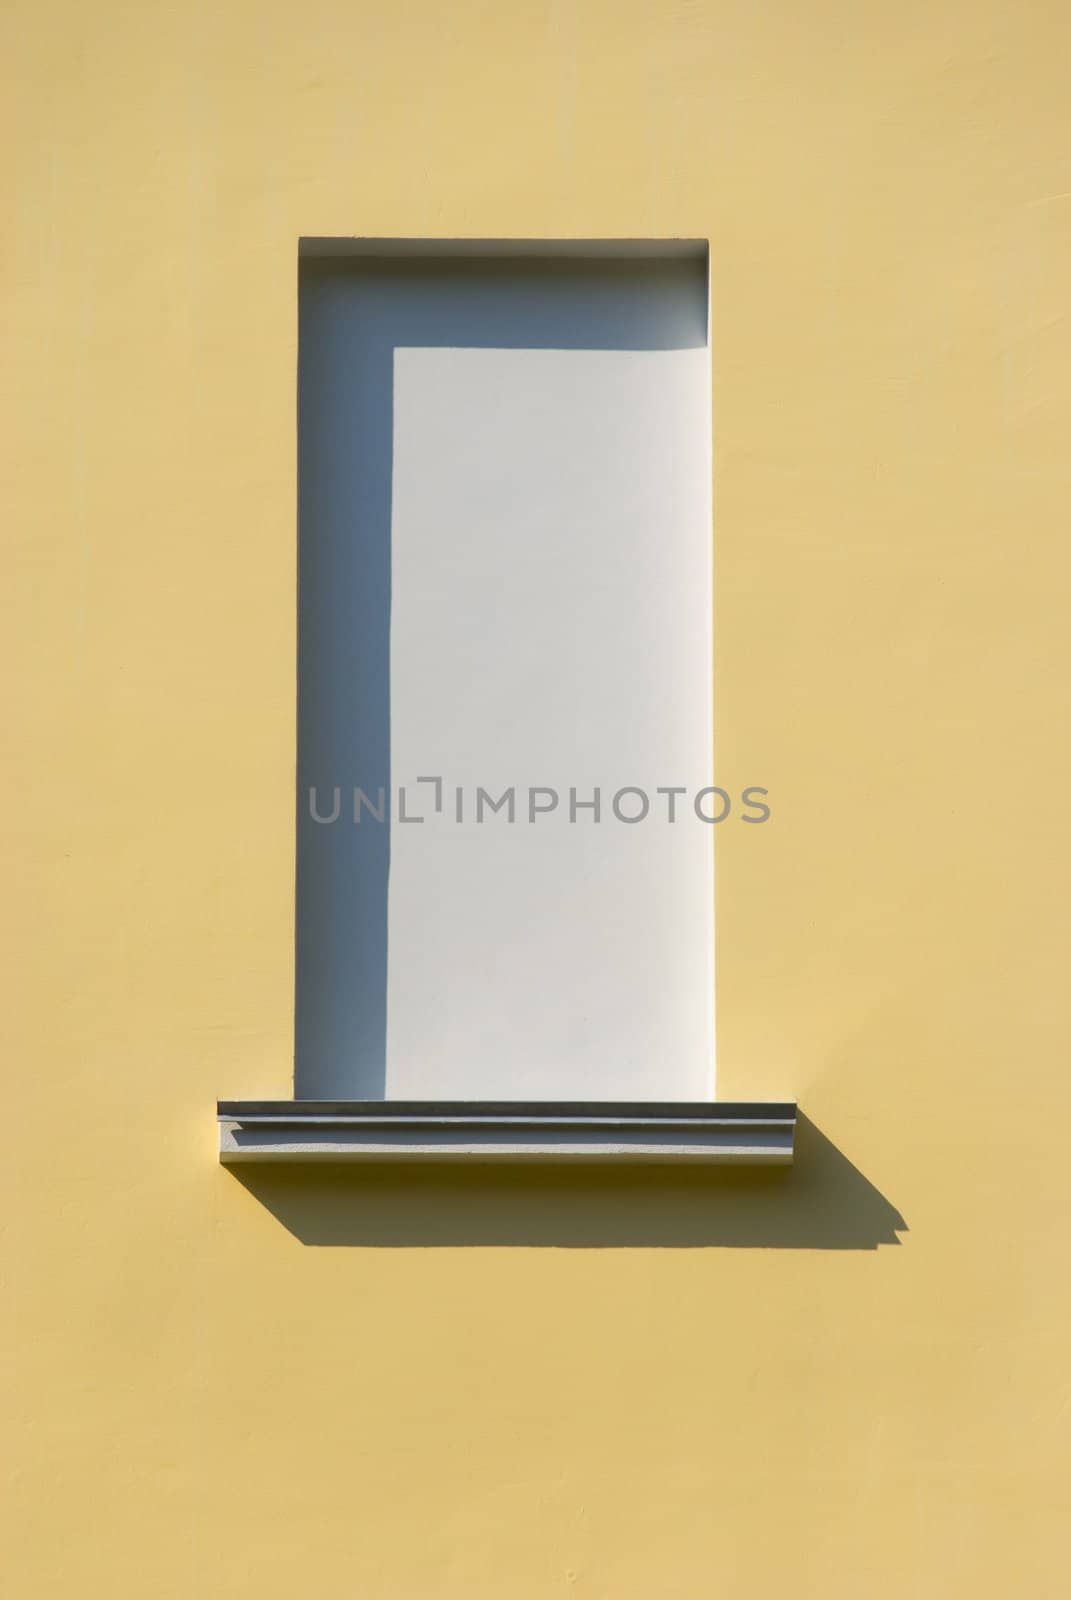 The window is immure in yellow wall